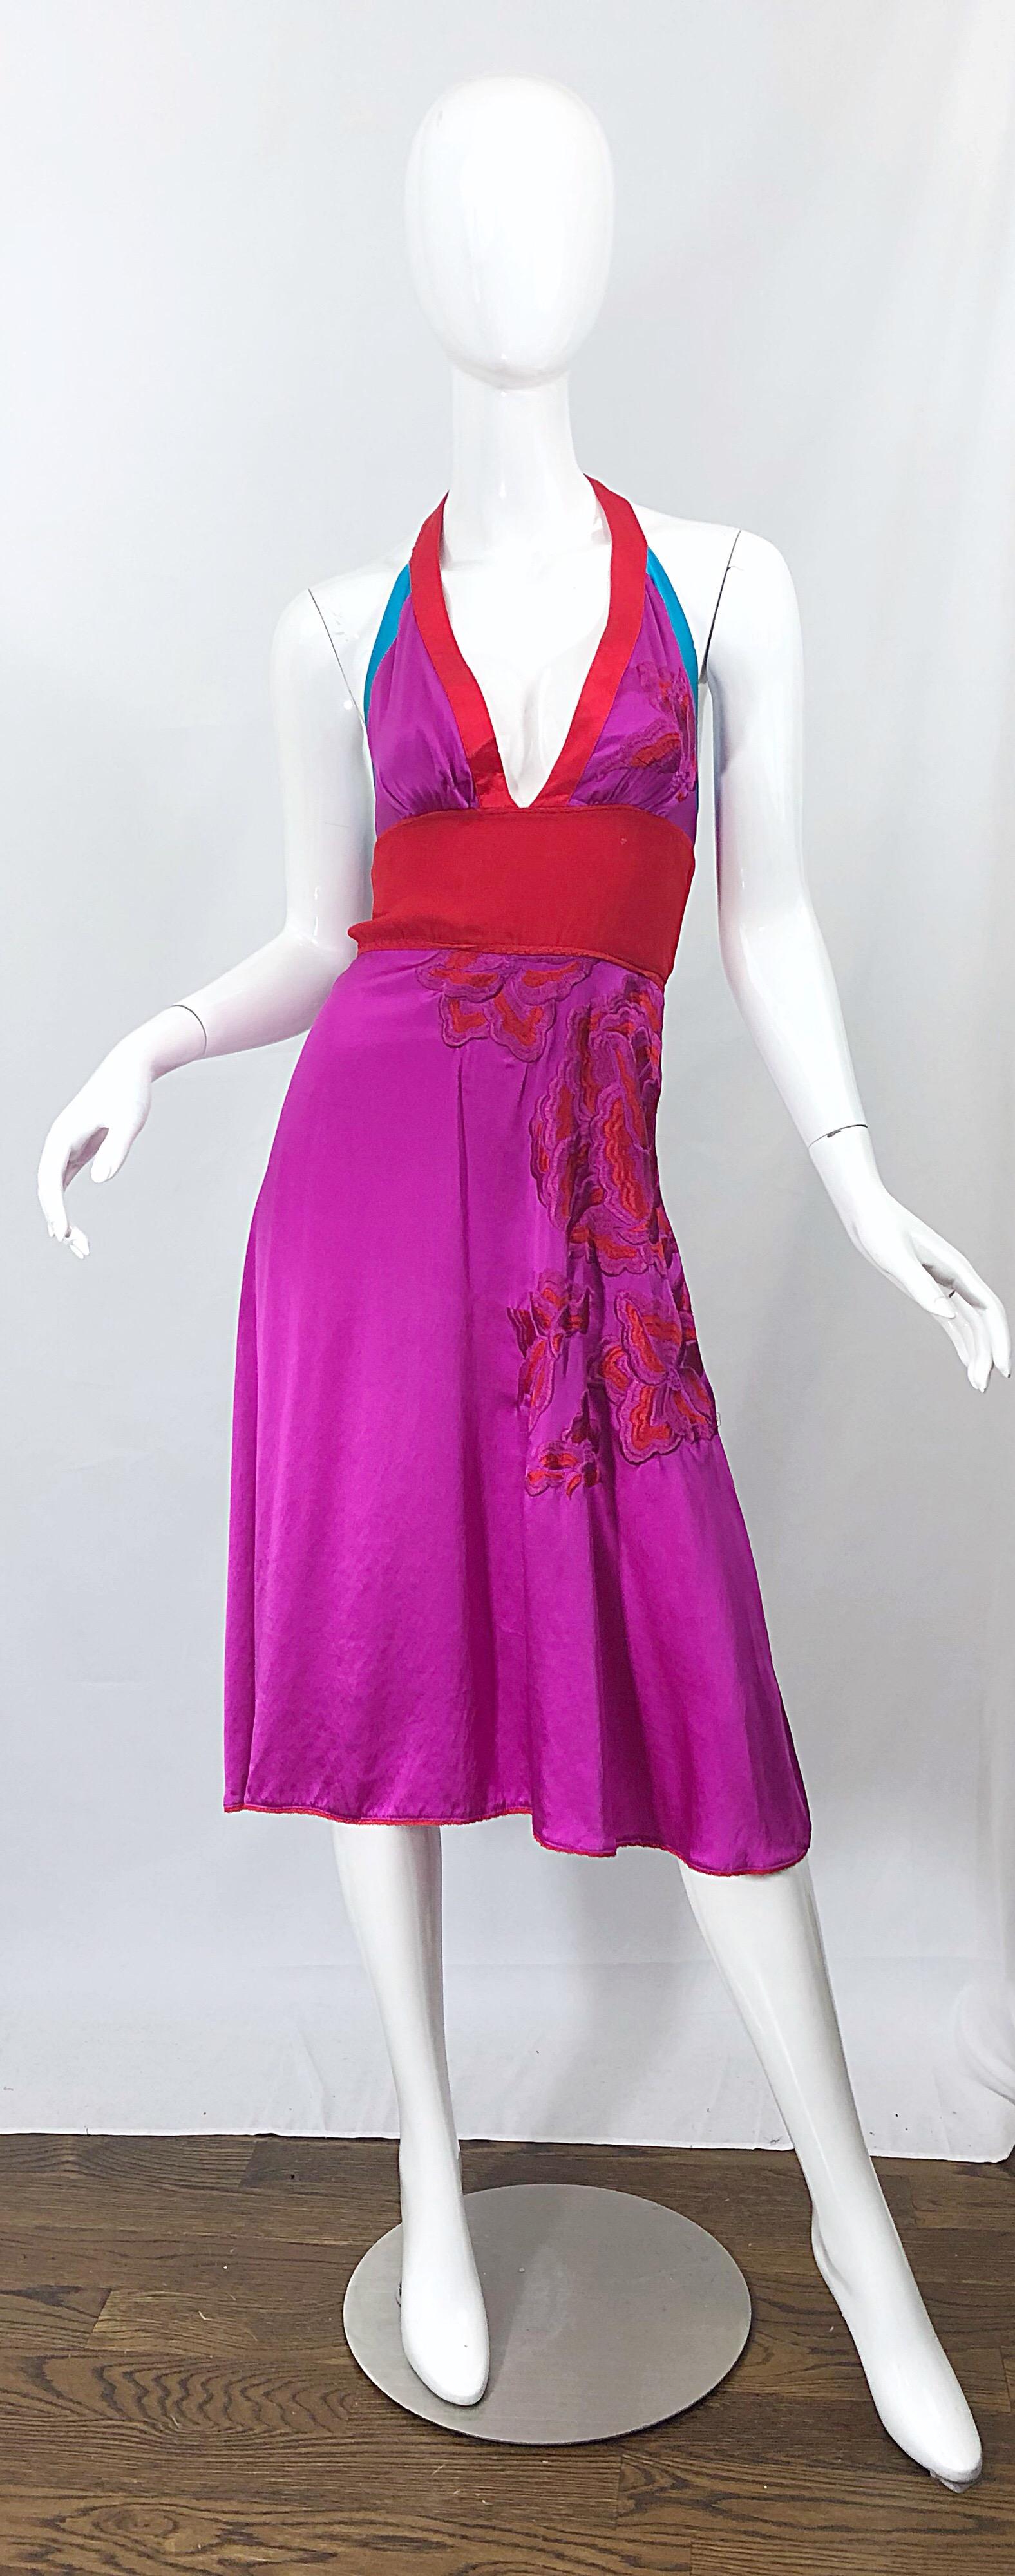 Sexy late 90s vintage GIANFRANCO FERRE plunging embrodiered silk halter dress! Features a hot pink fuchsia base with accents of red and turquoise blue throughout. Ties in the back that reveals just the right amount of skin. Hidden zipper up the back